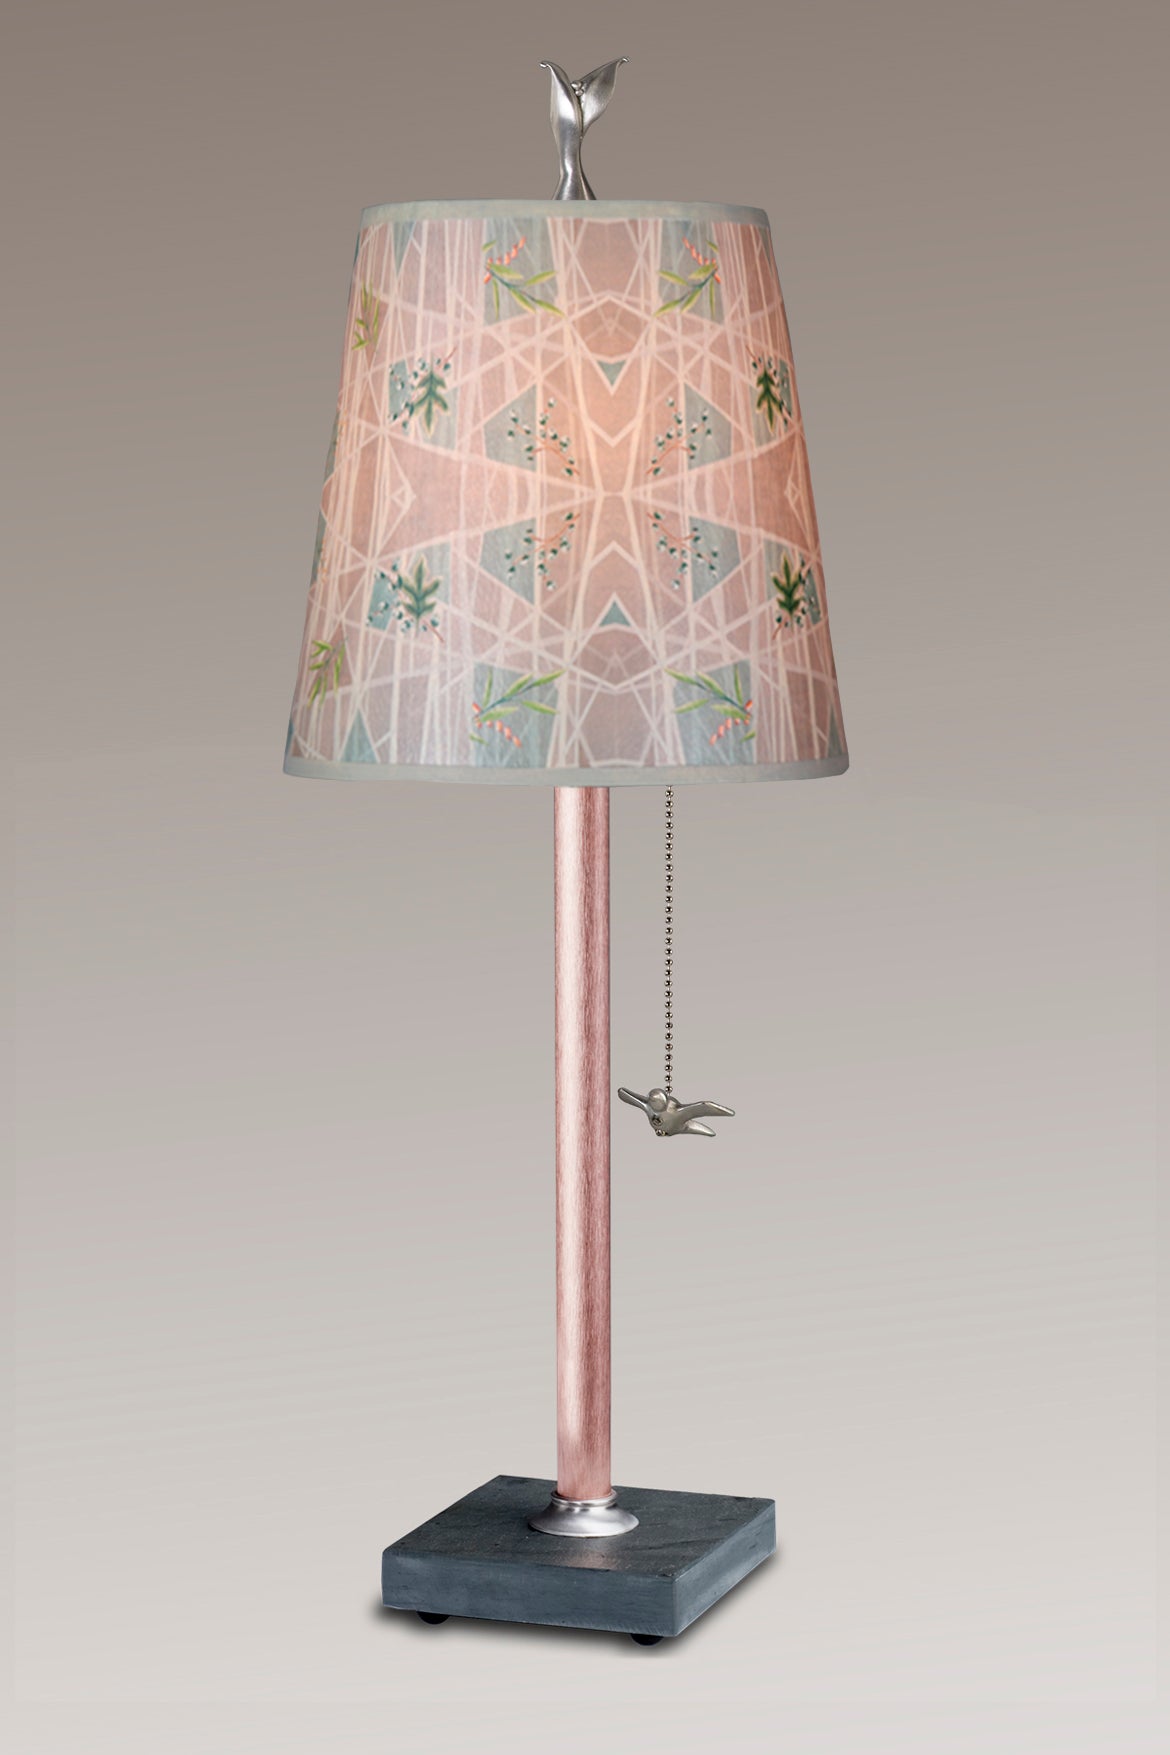 Janna Ugone & Co Table Lamps Copper Table Lamp with Small Drum in Prism